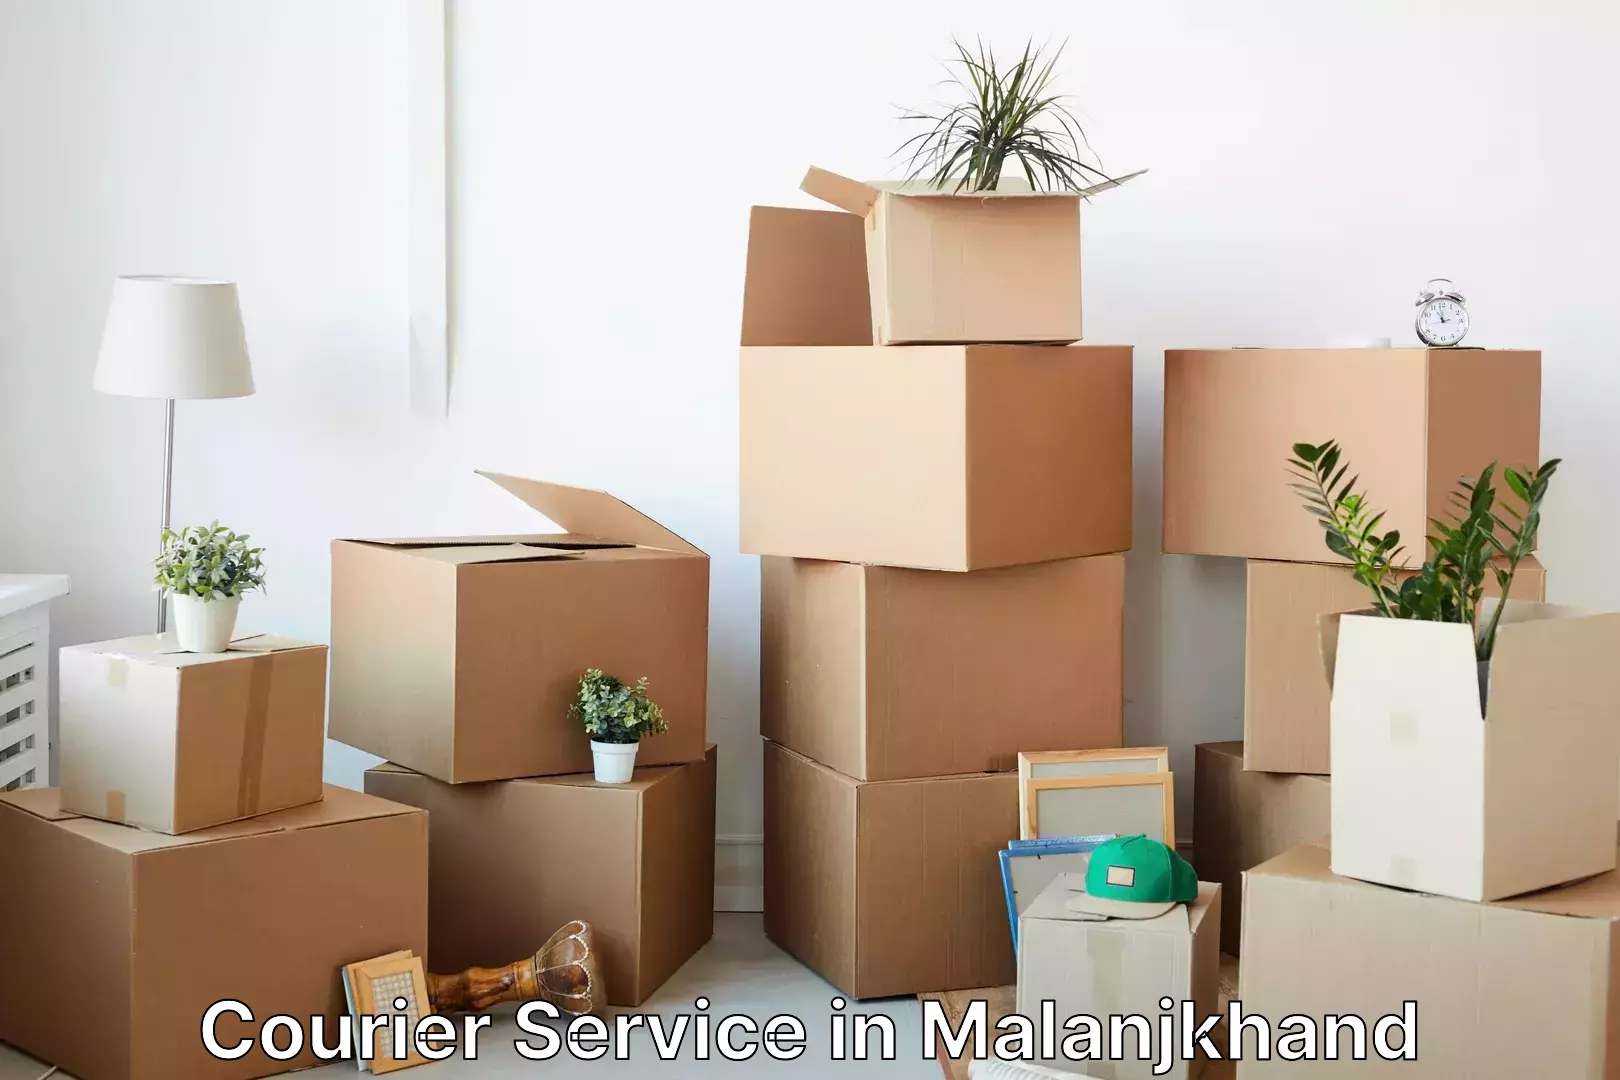 Overnight delivery services in Malanjkhand